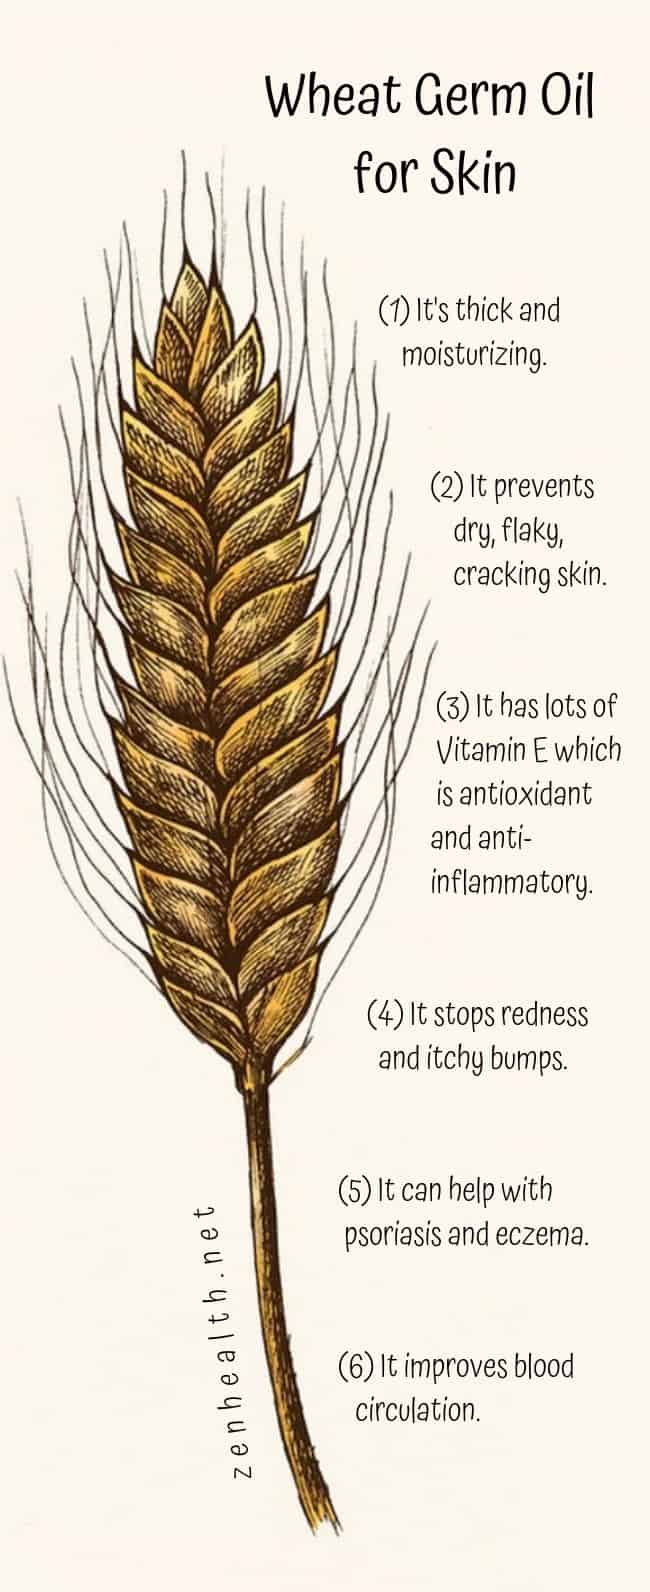 Benefits of Wheat Germ Oil for Skin